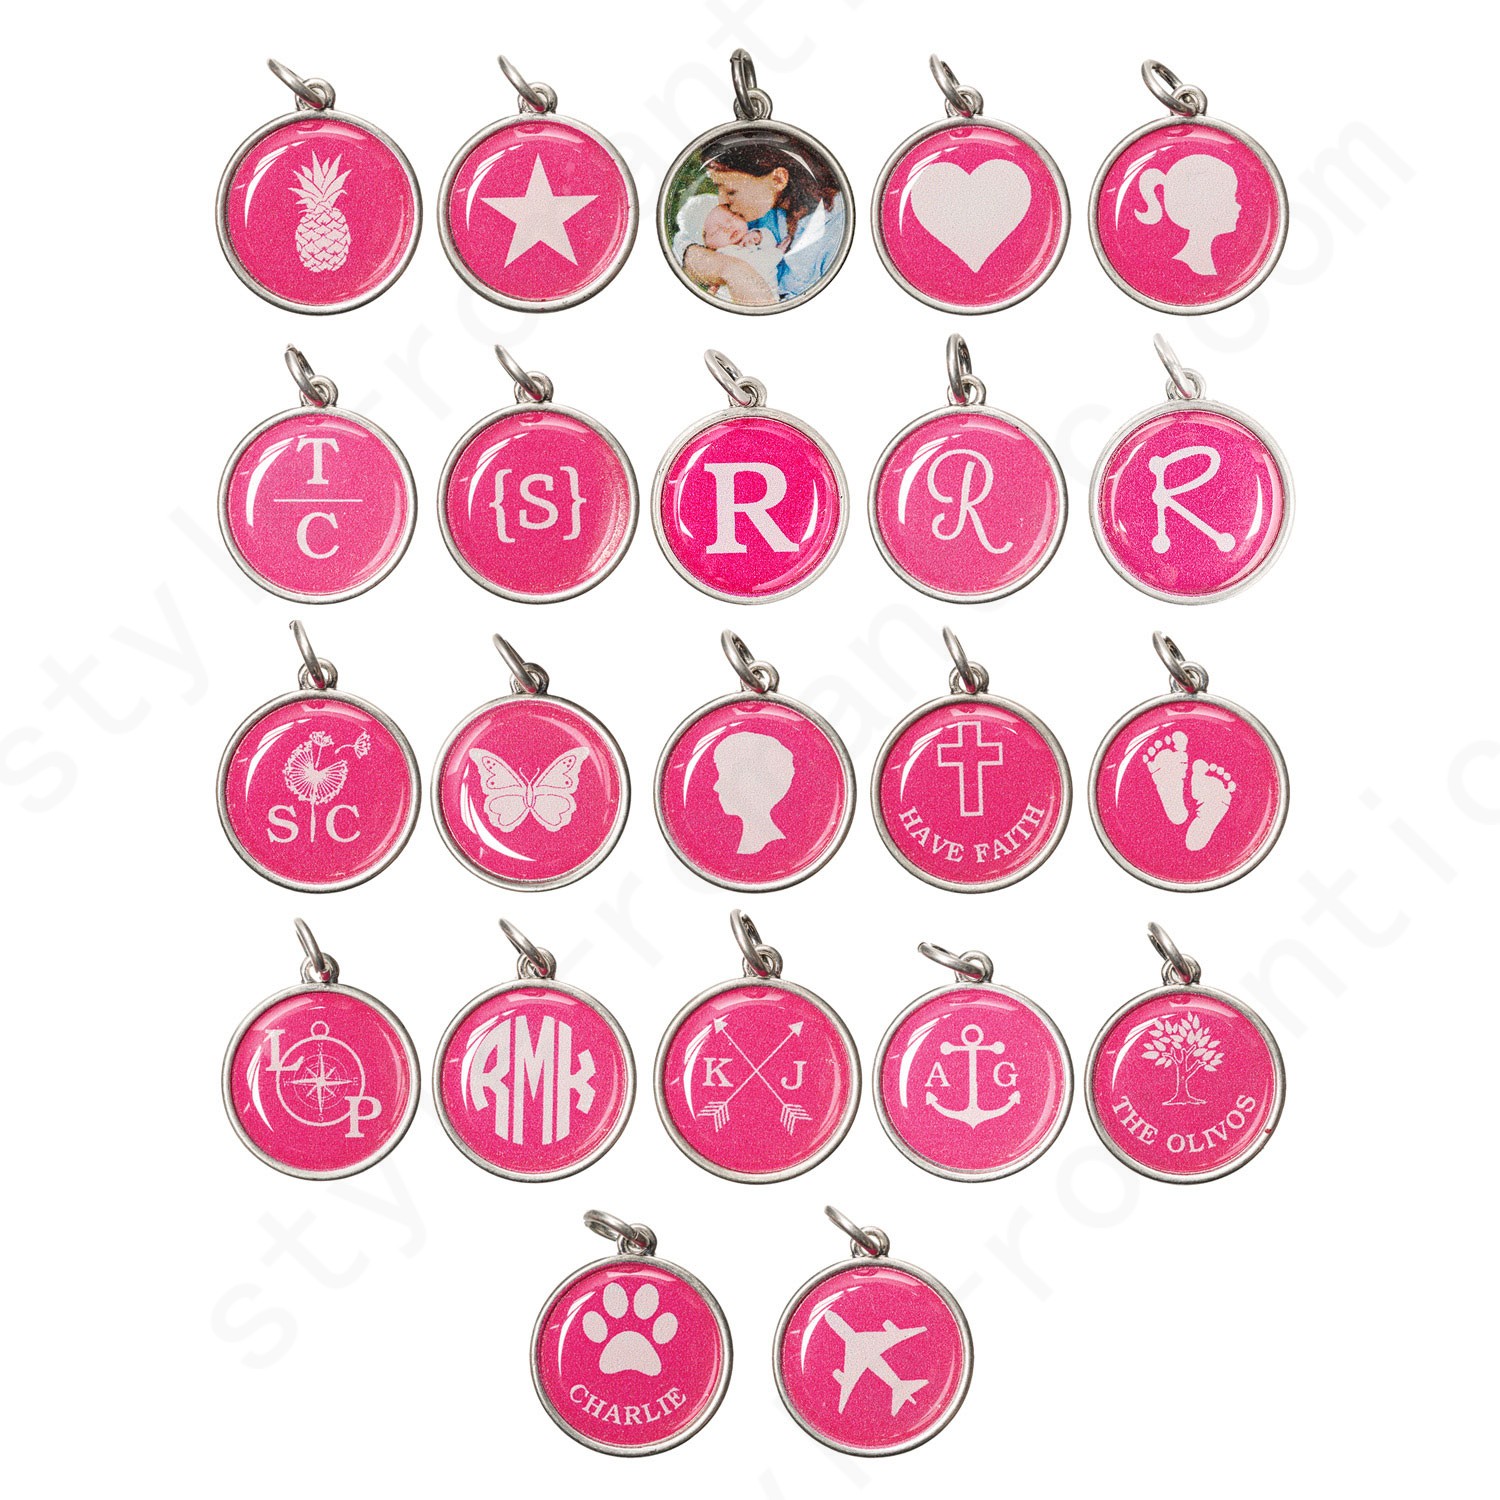 Thirty-One Gifts Just Write Charm Large Circle - Silver Tone Handbag Accessories - Thirty-One Gifts Just Write Charm Large Circle - Silver Tone Handbag Accessories